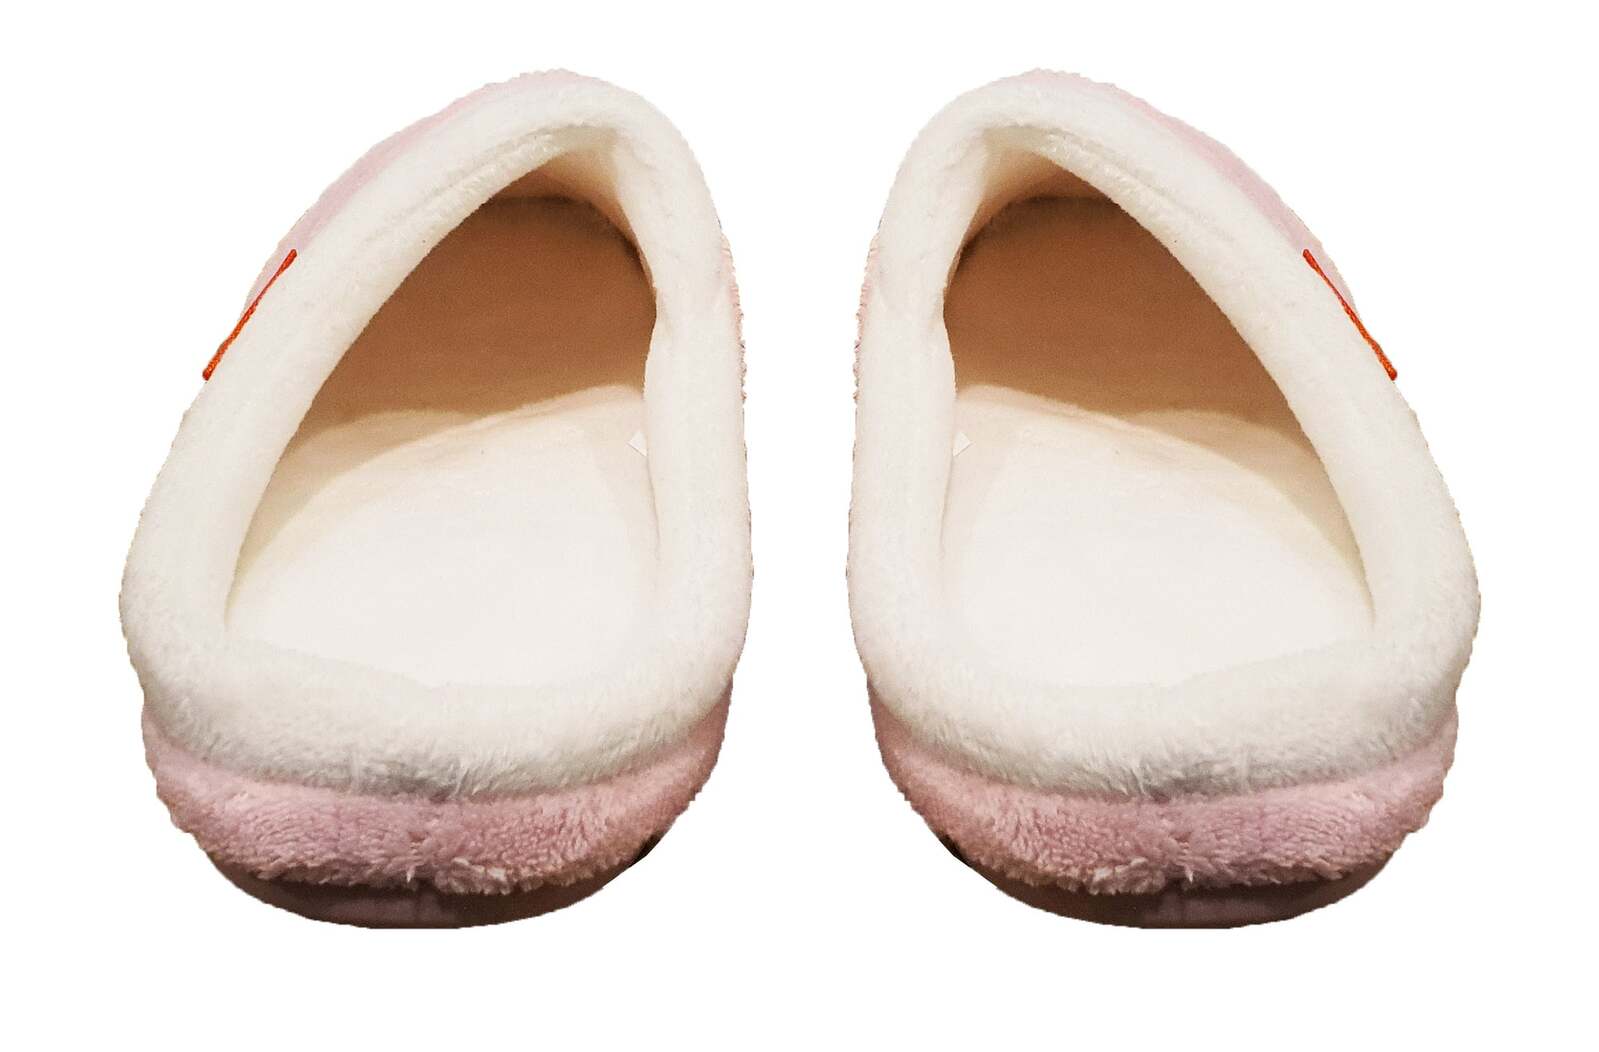 ARCHLINE Orthotic Slippers Slip On Arch Scuffs Pain Relief Moccasins - Pink - EU 42